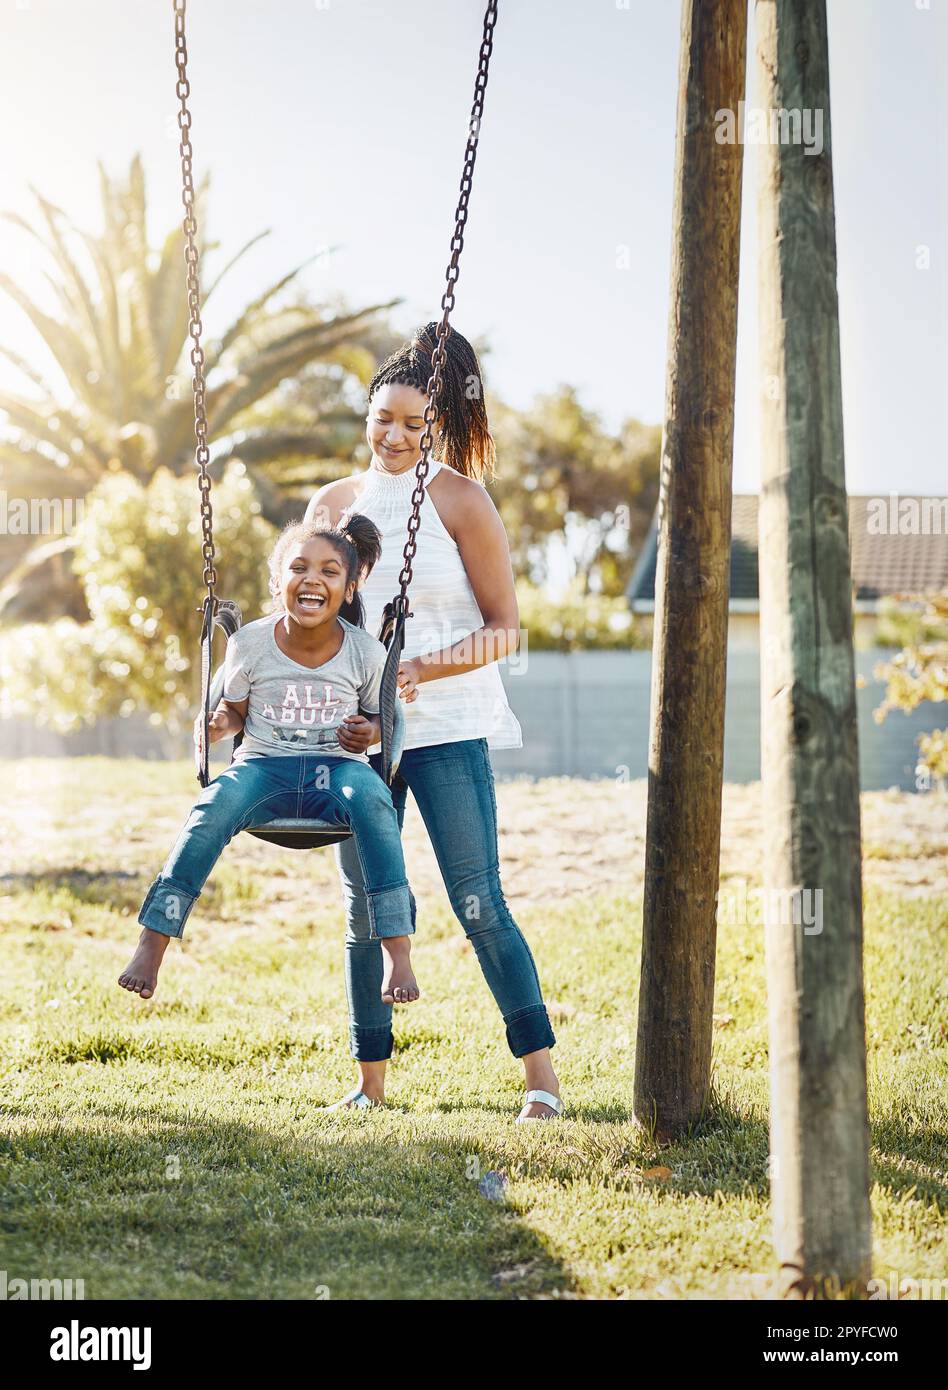 Her laughter brightens the day even more. a mother pushing her daughter on a swing at the park. Stock Photo